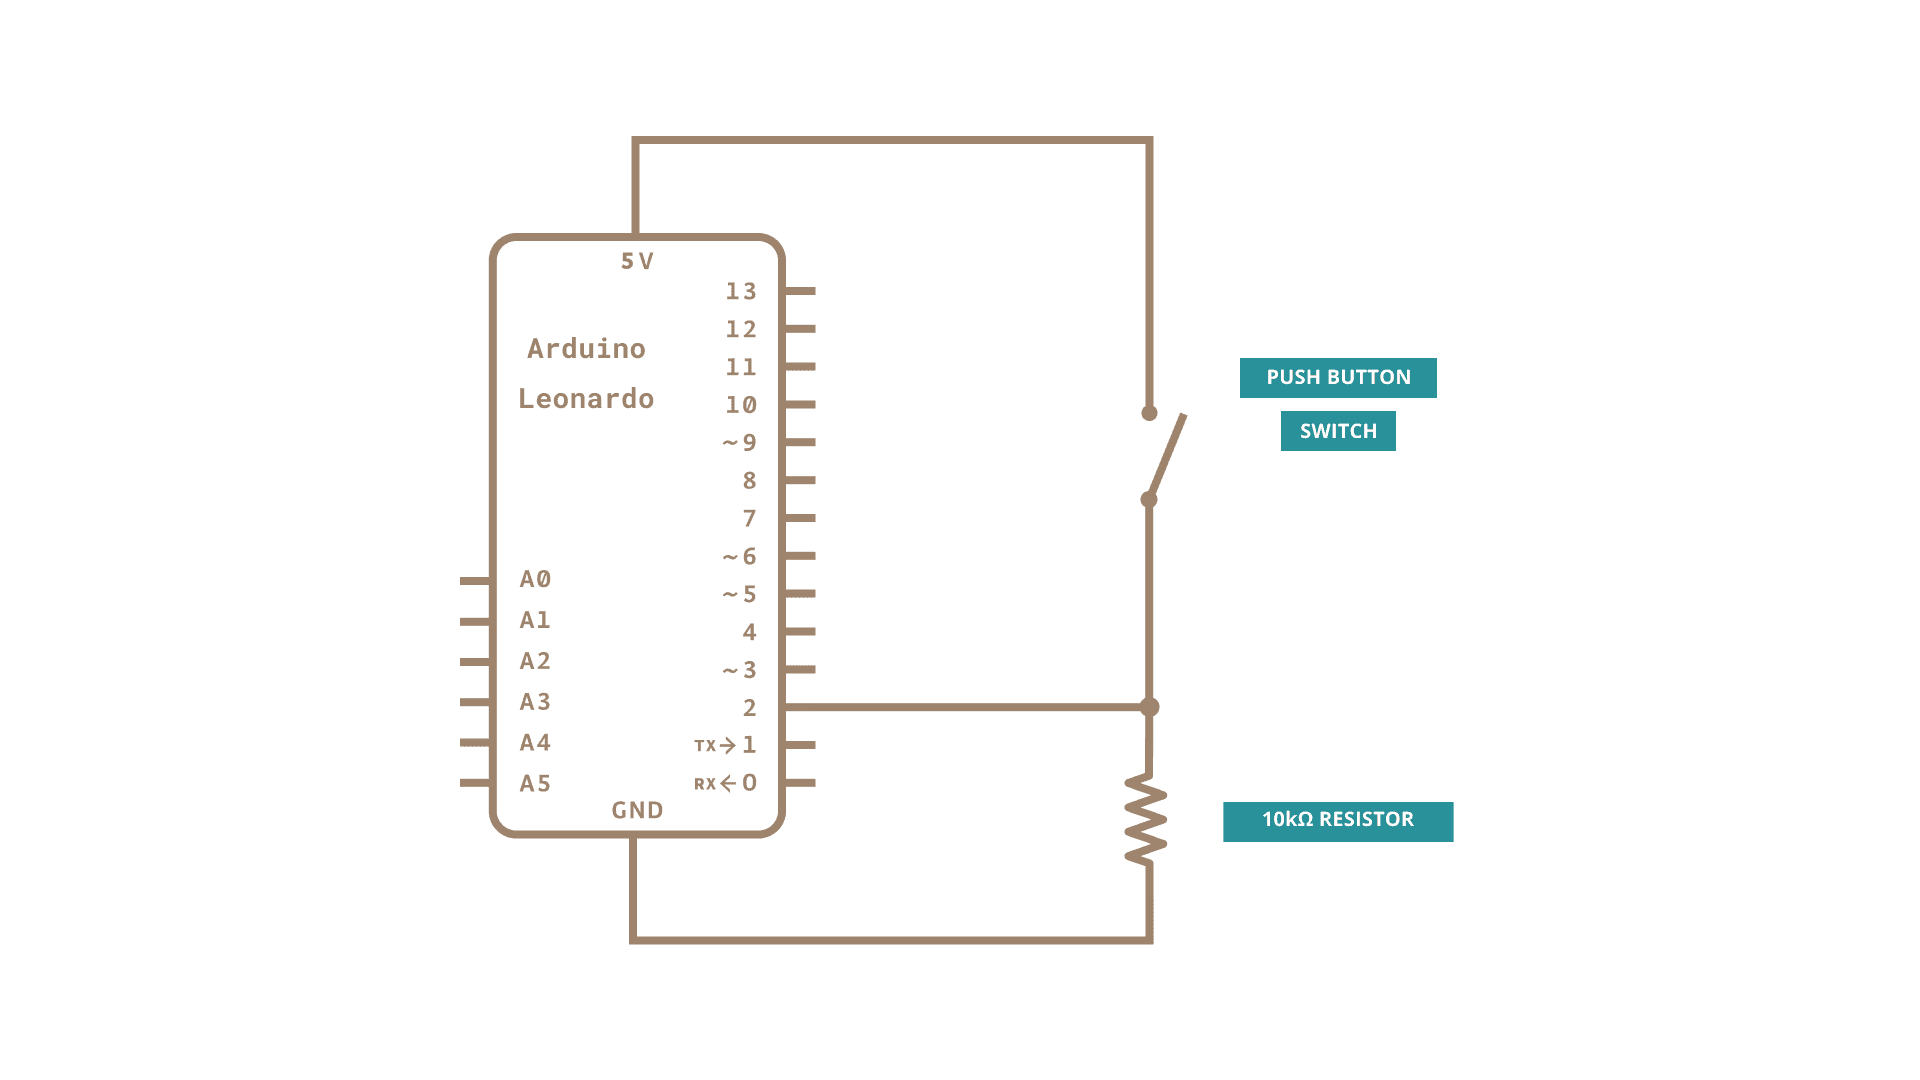 Circuit Schematics showing an Arduino Leonardo, a switch and a resistor. The switch is connected from 5V to Pin number 2. The resistor is used as a pull-down from pin number 2 to Ground